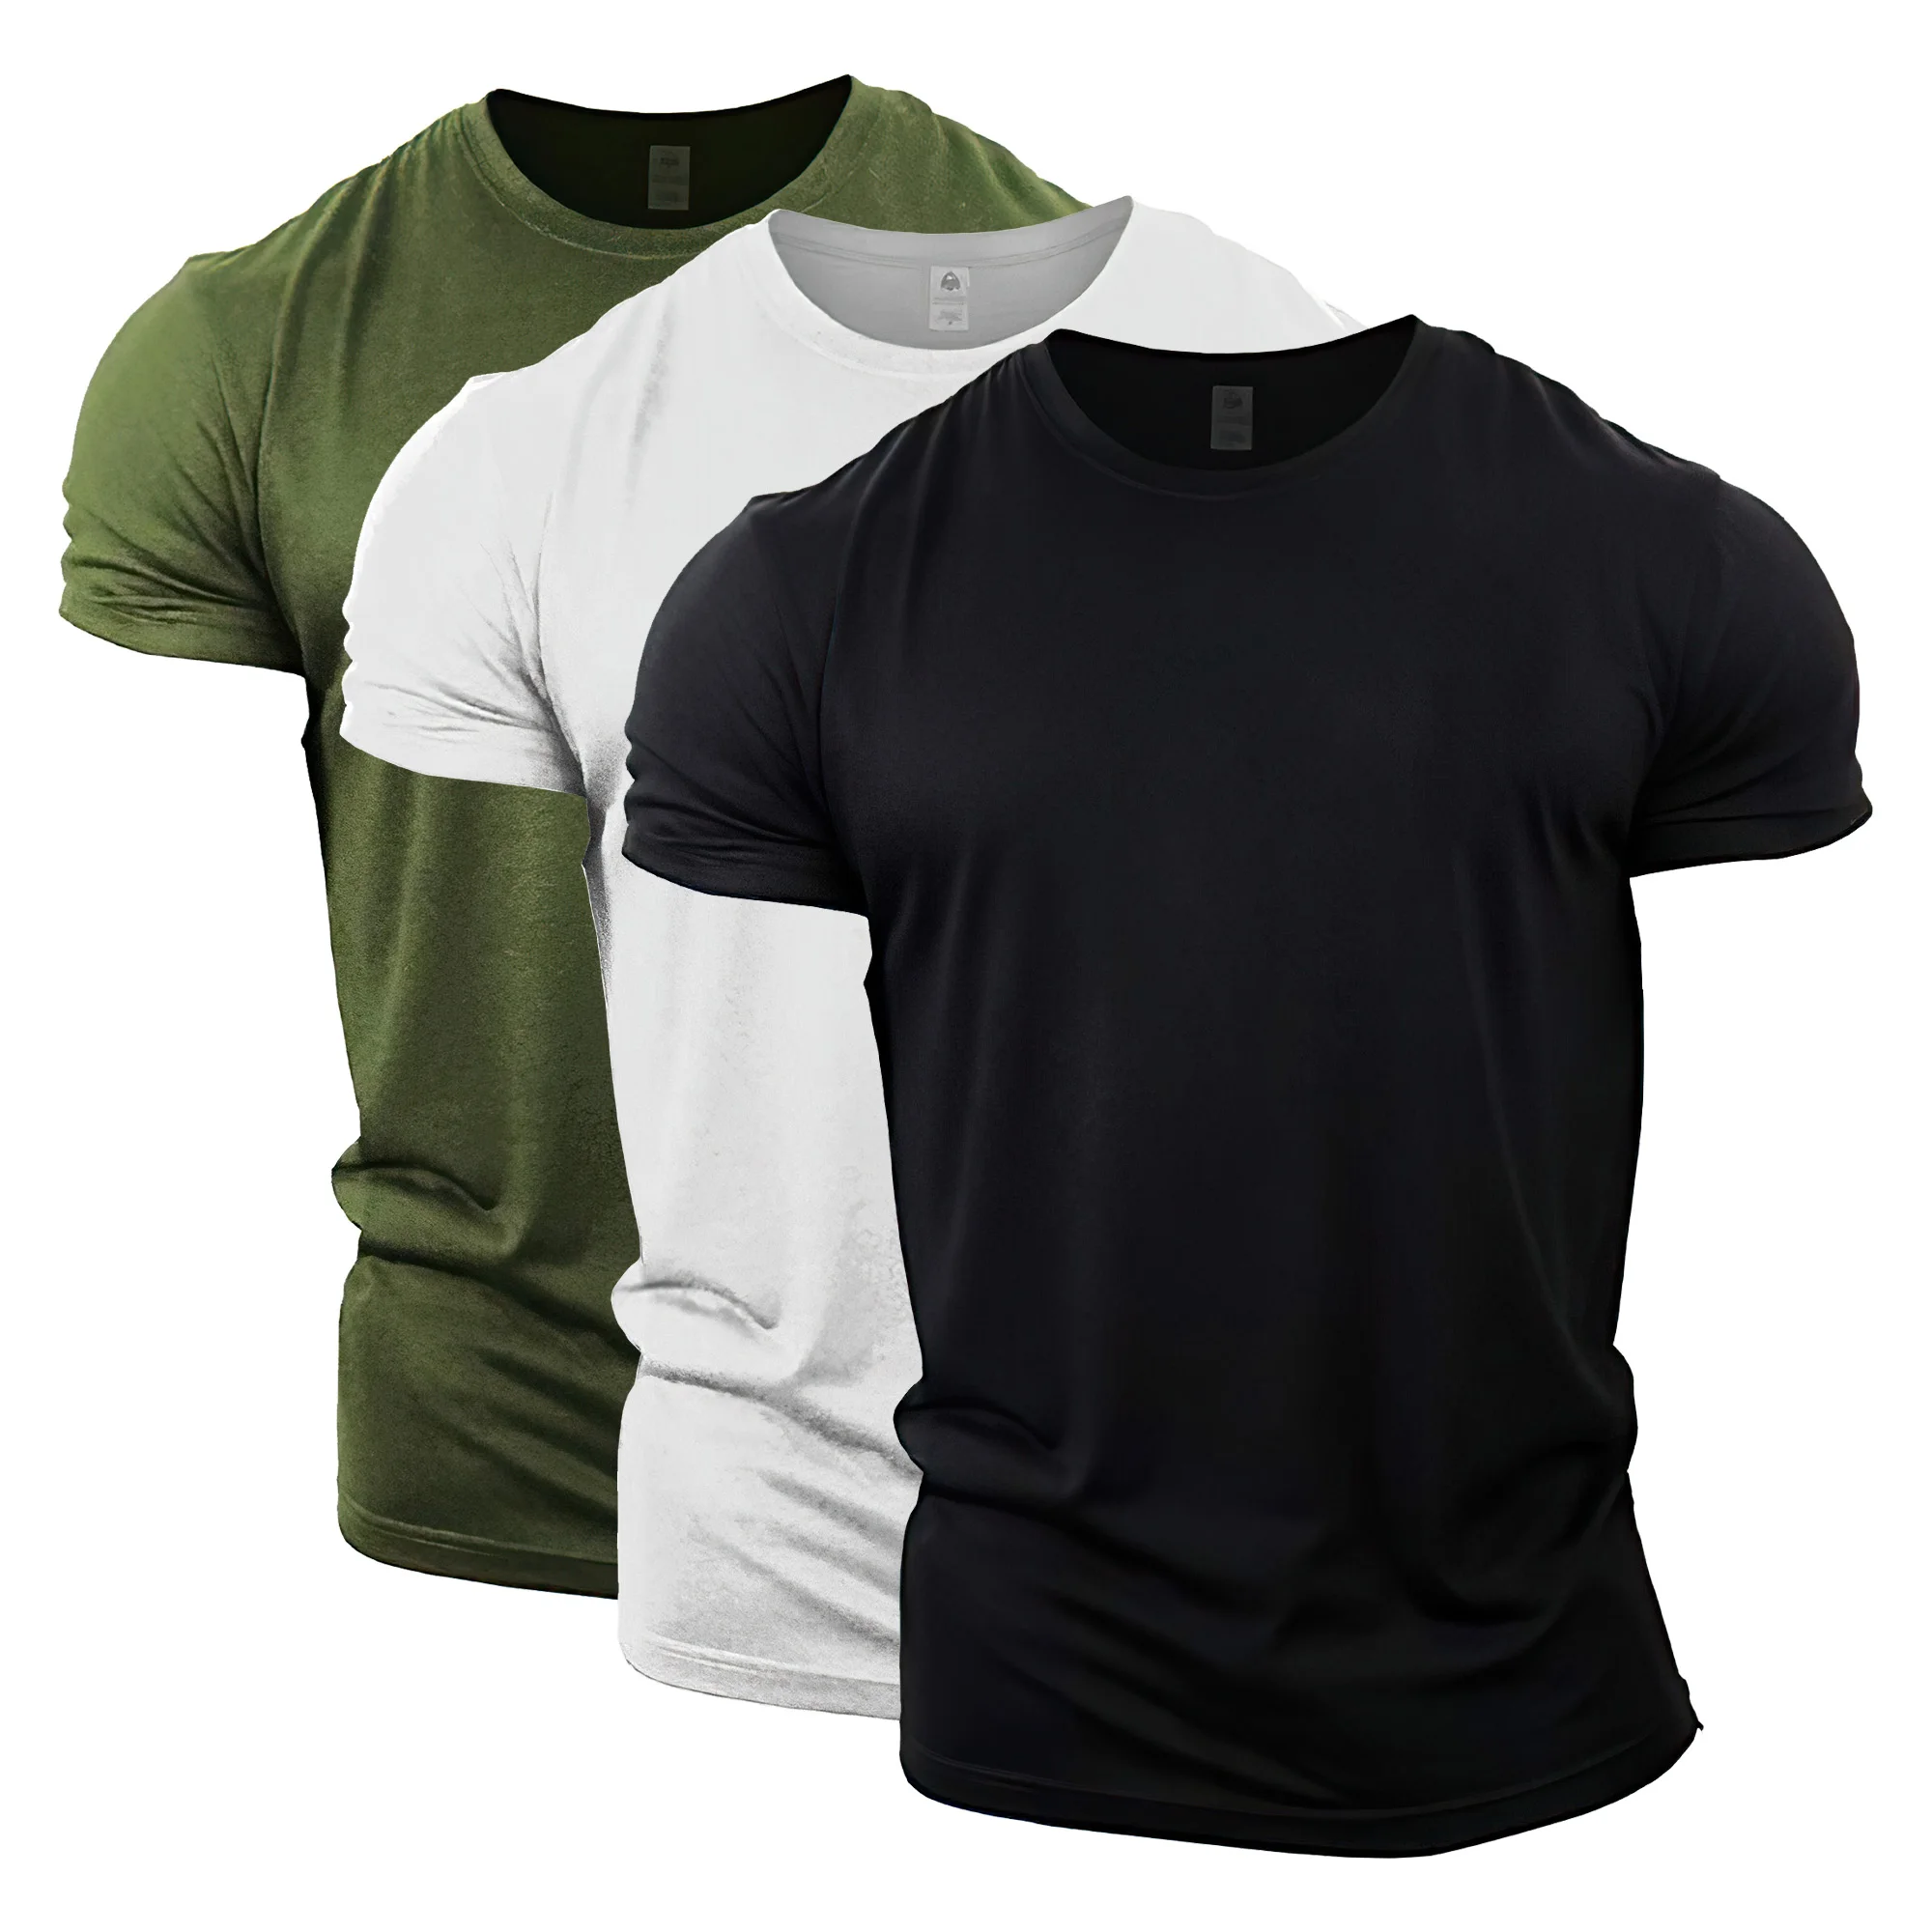 Men's Solid Color Fitness Short Sleeve T-shirt Gym Short Sleeve Mens Moisture Wicking Athletic Workout T-Shirt Tee